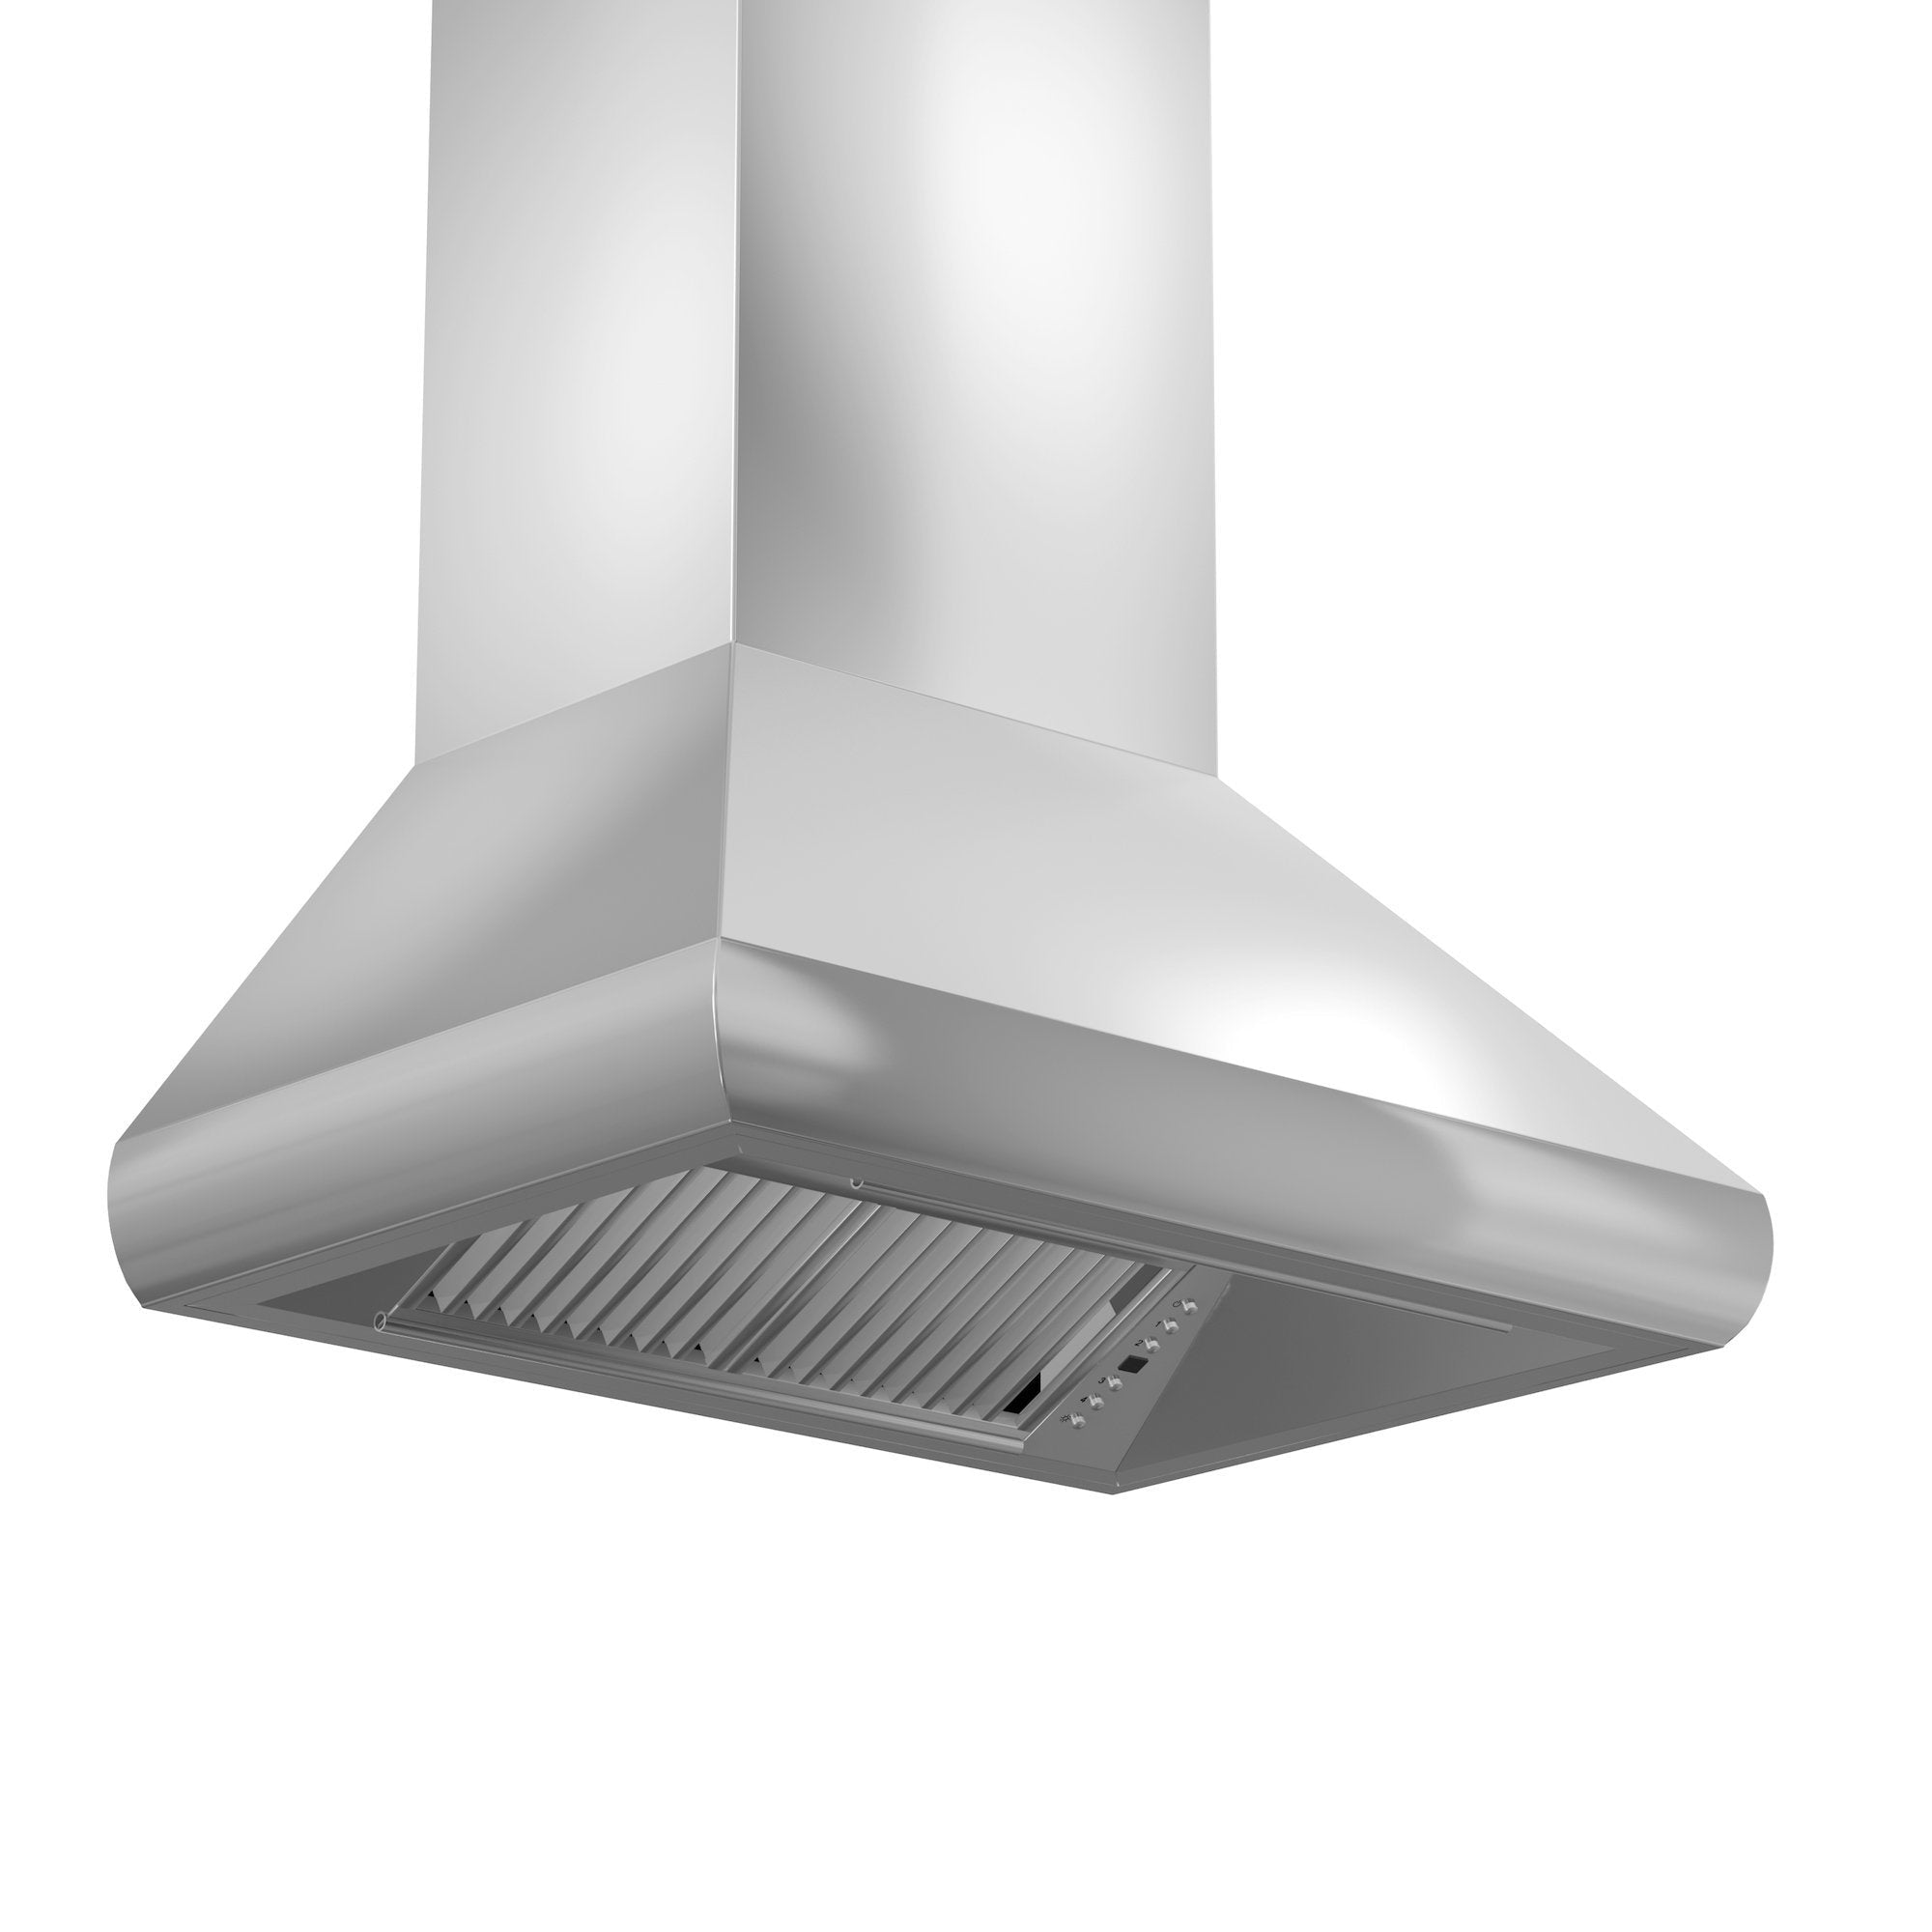 ZLINE Professional Convertible Vent Wall Mount Range Hood in Stainless Steel with Crown Molding (587CRN) side, under.